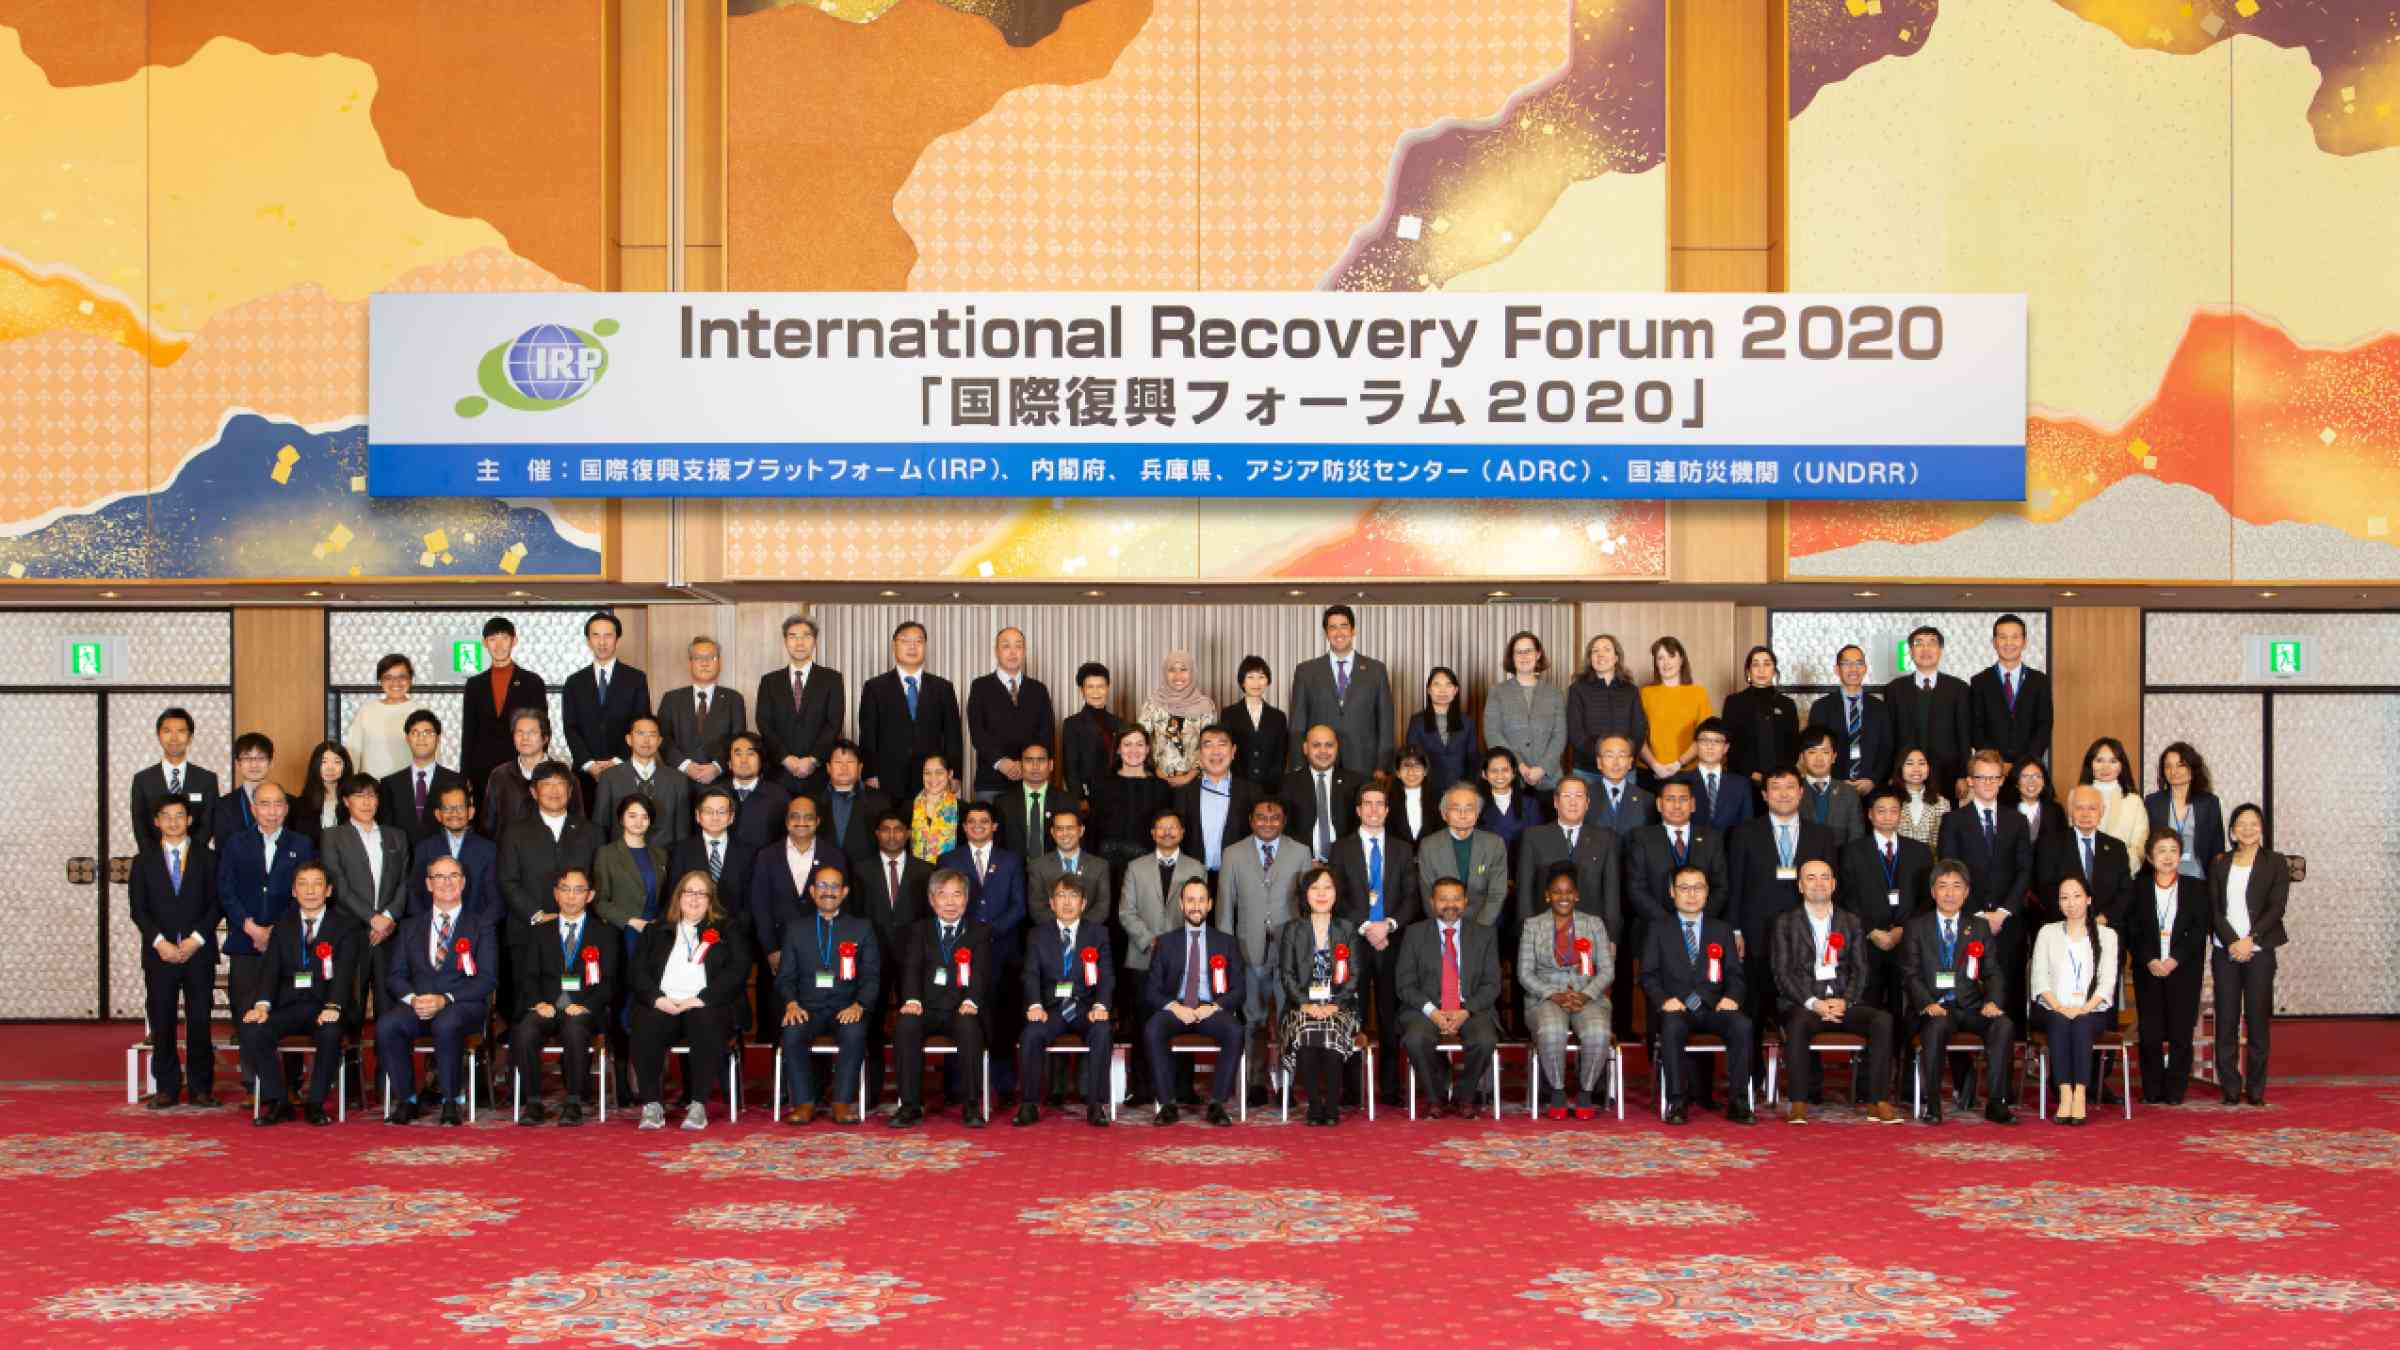 IRP Forum 2020 Group Photo